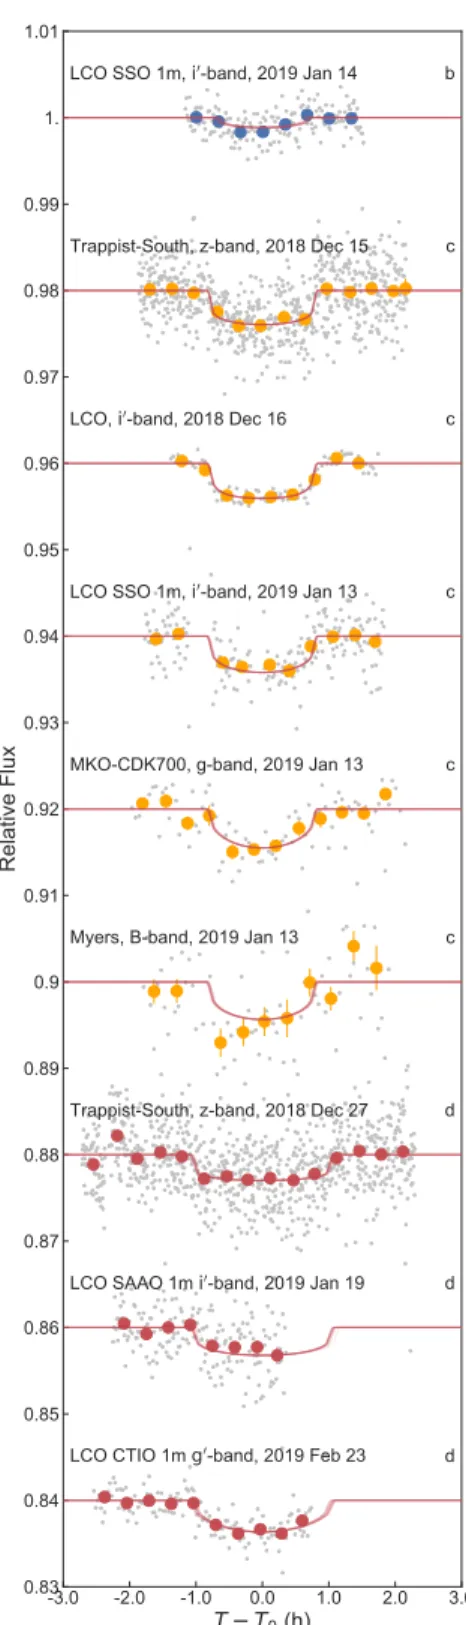 Figure M2: Follow-up lightcurves for TOI-270 (see also Table M1). Red lines show 20 lightcurves generated from randomly drawn posterior samples from the best-fit allesfitter model.